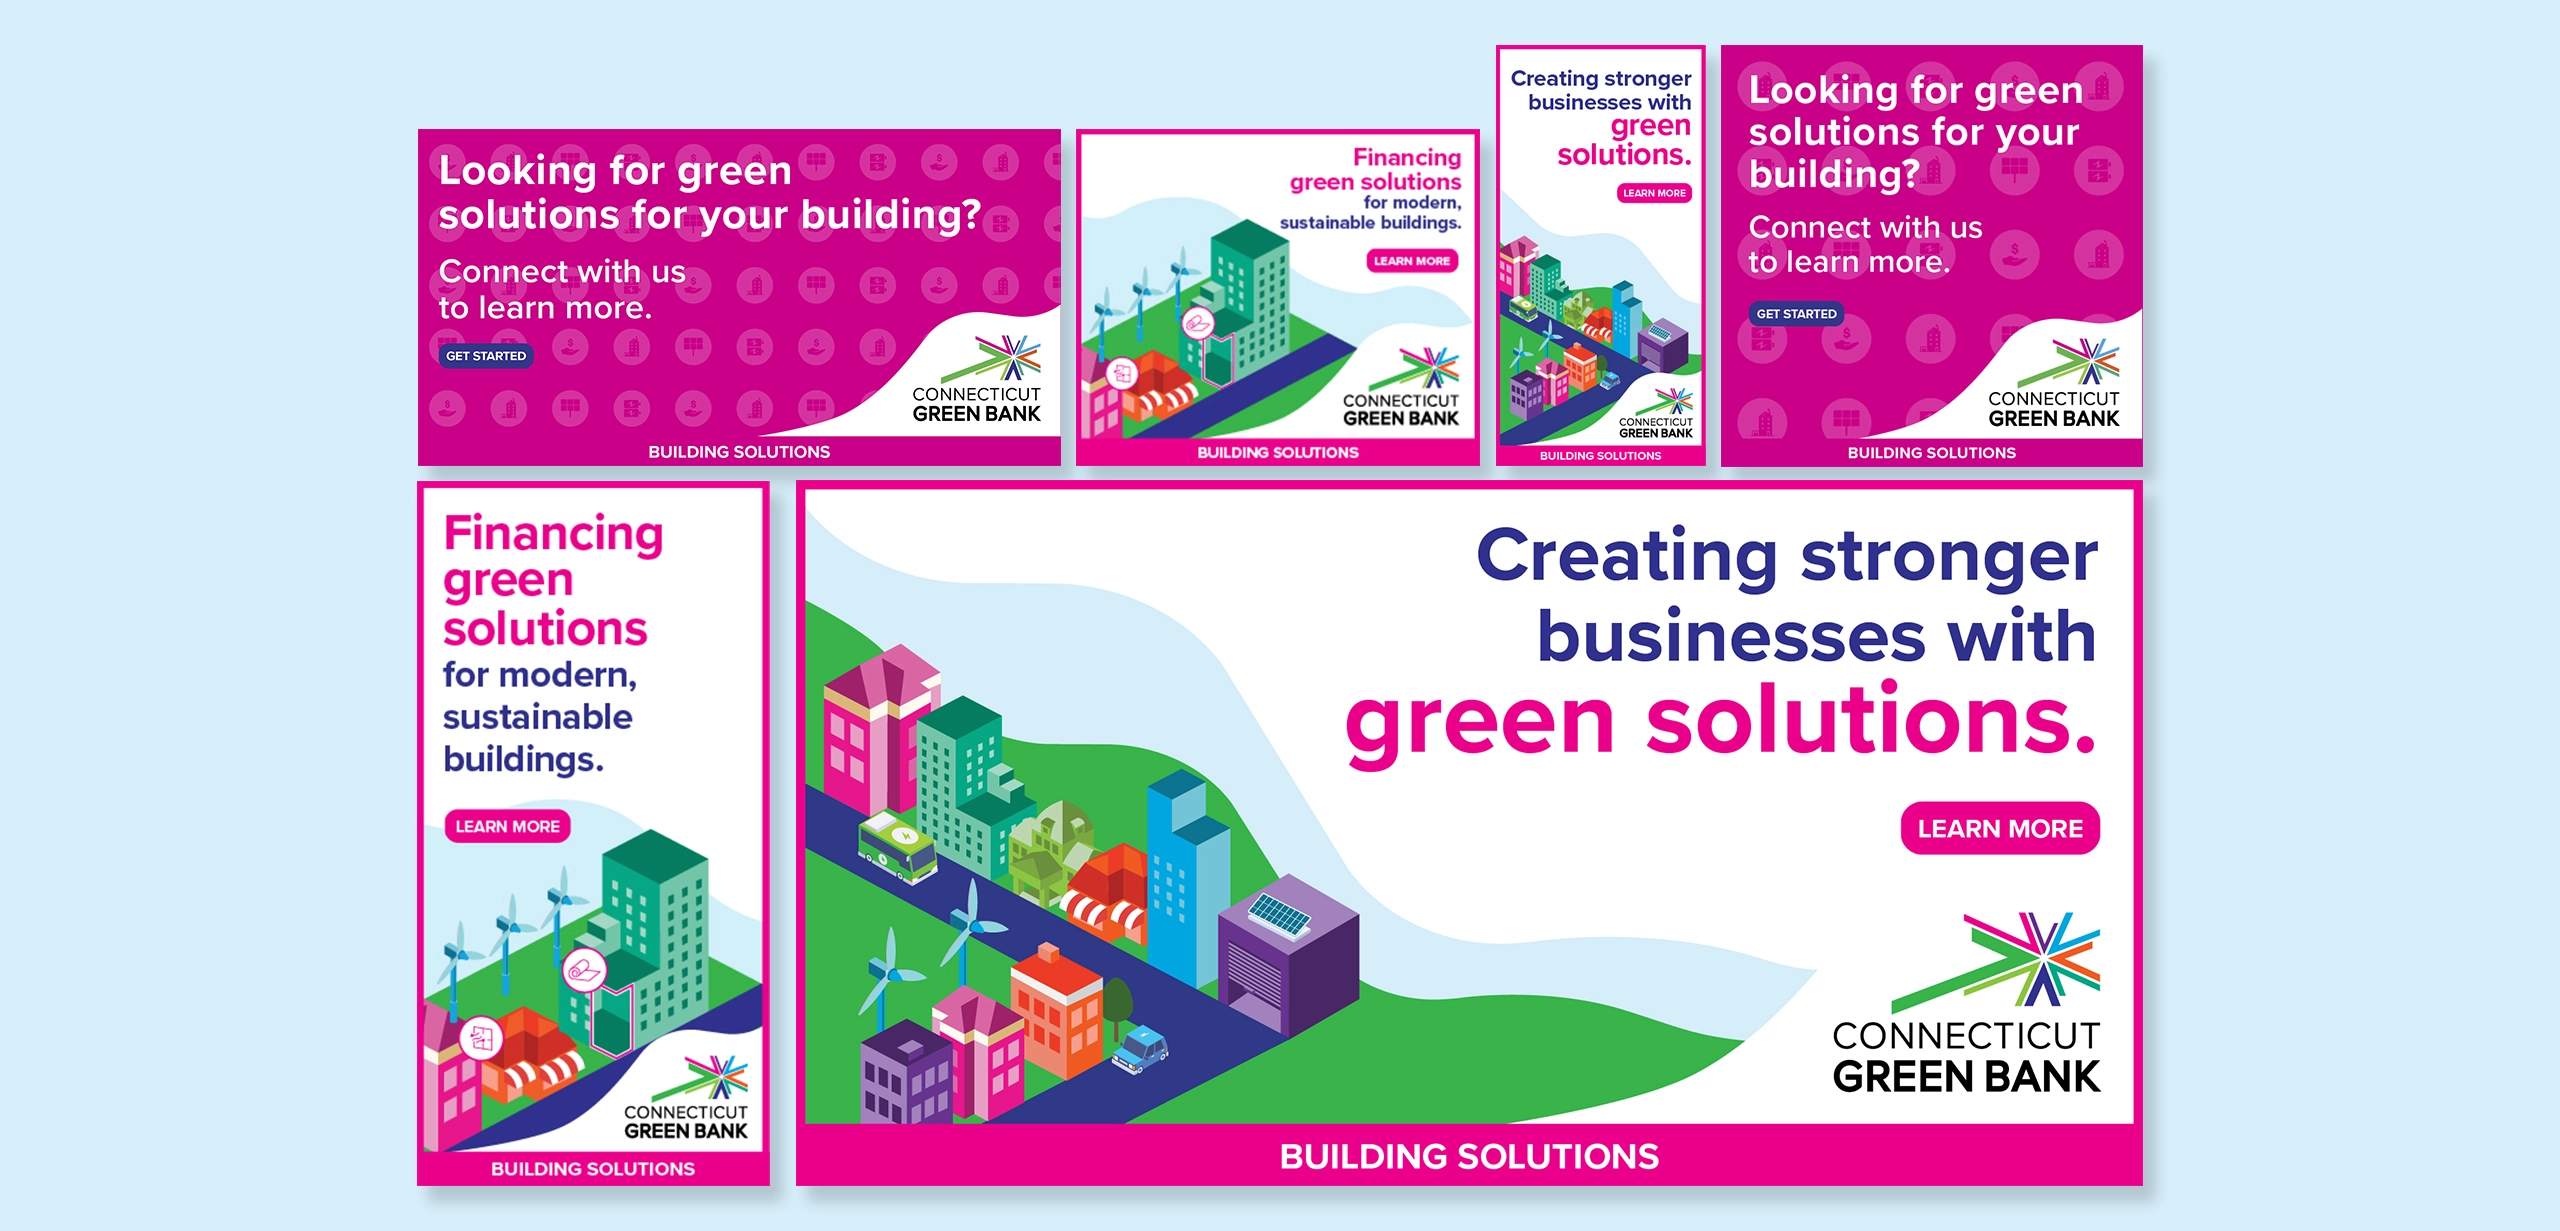 Digital Banner ad campaign for regional clean energy improvement funding company targeting building owners